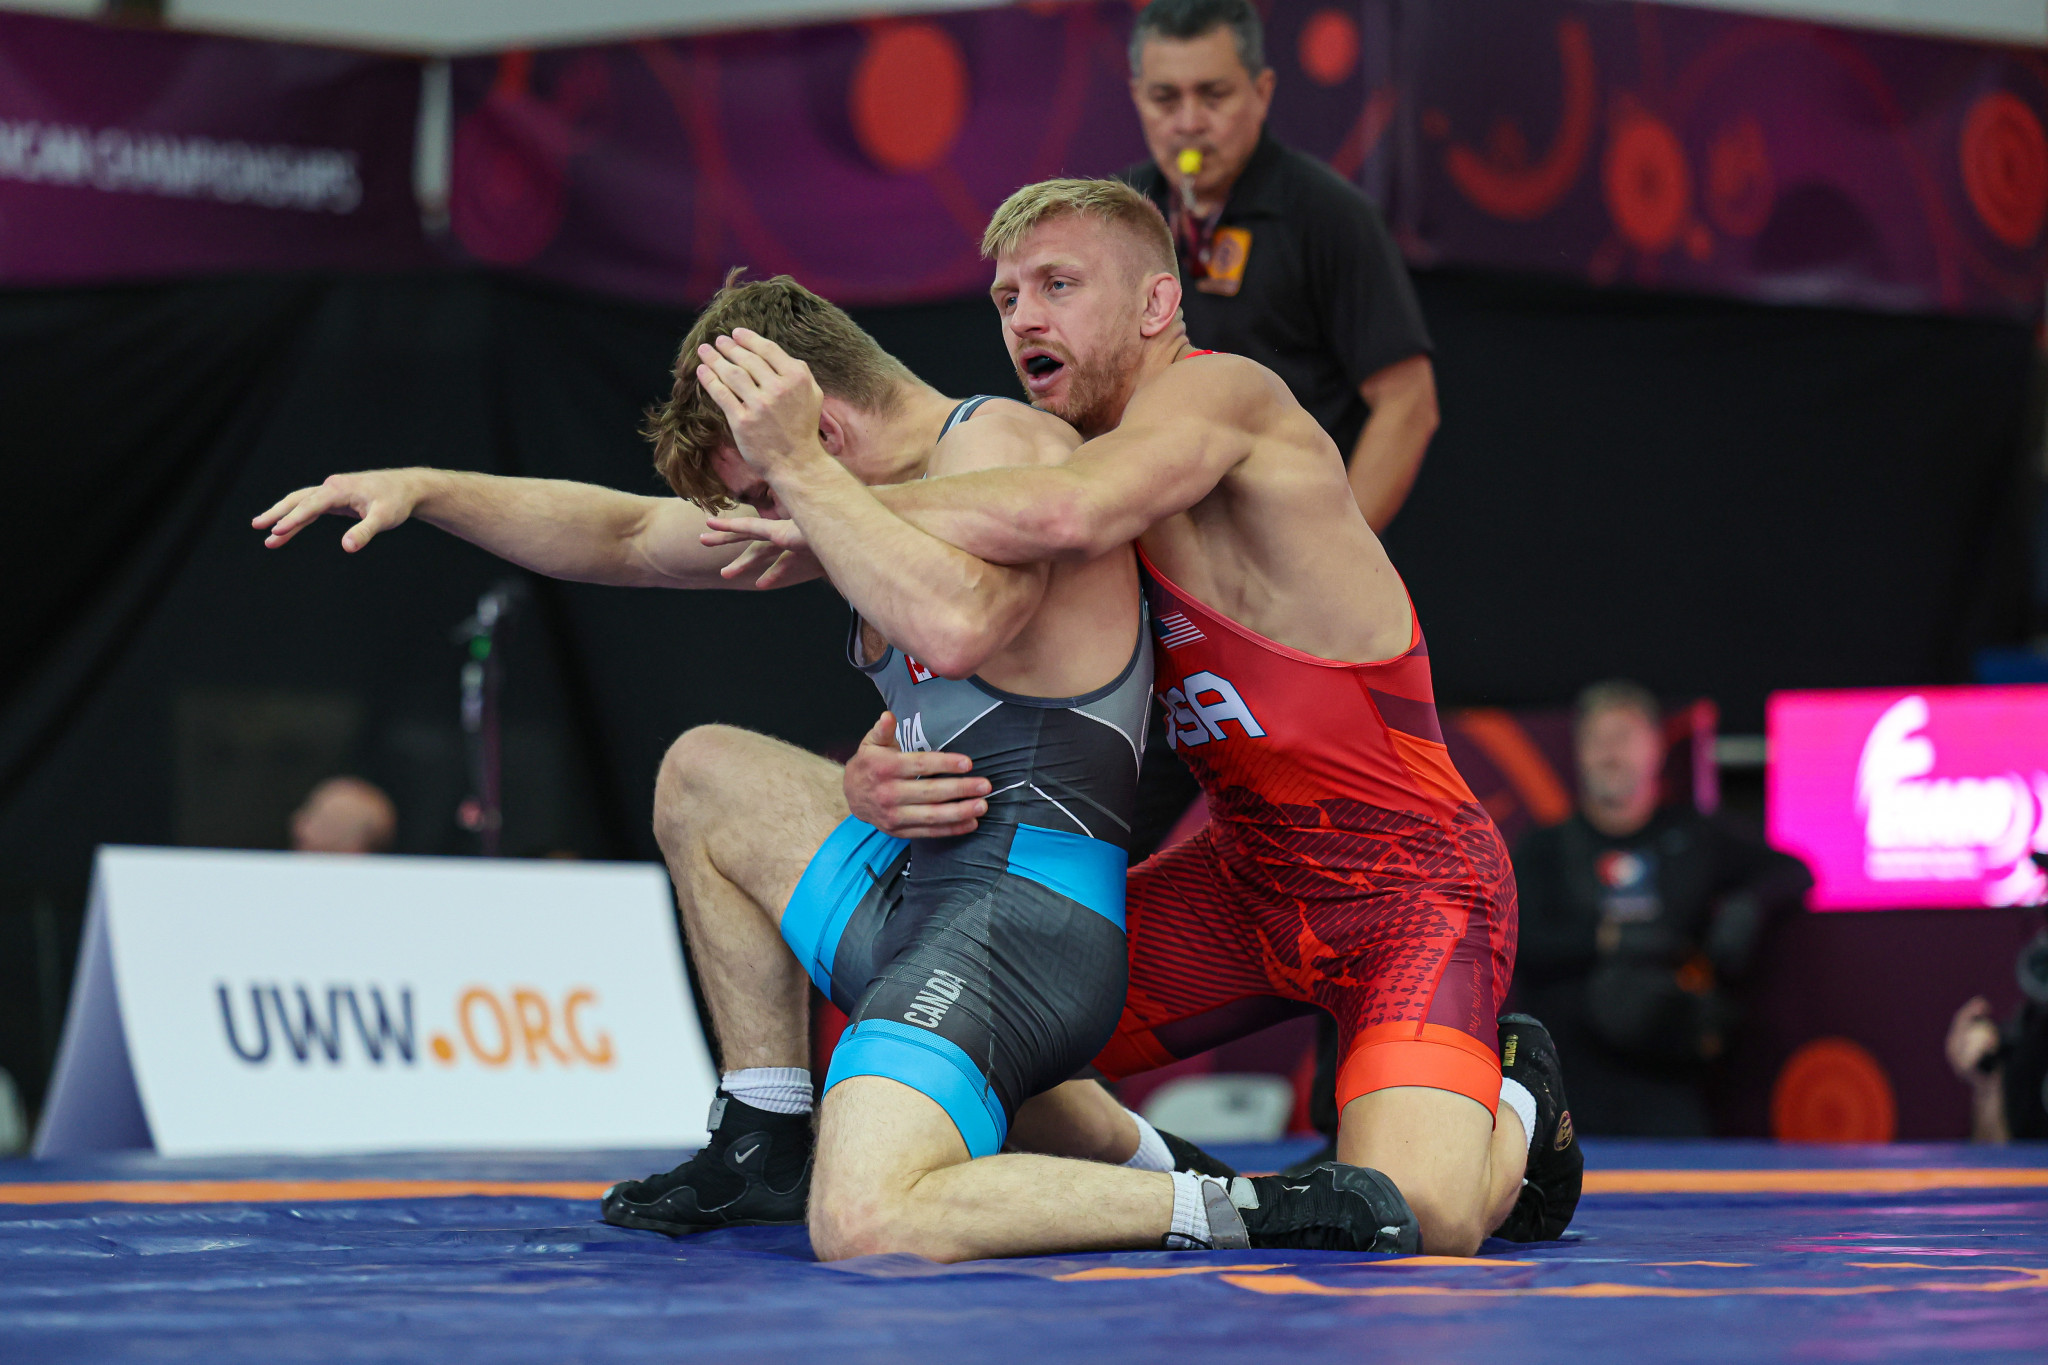 Kyle Dake, right, defended his title in a rematch of last year's final against Franklin Gomez ©UWW